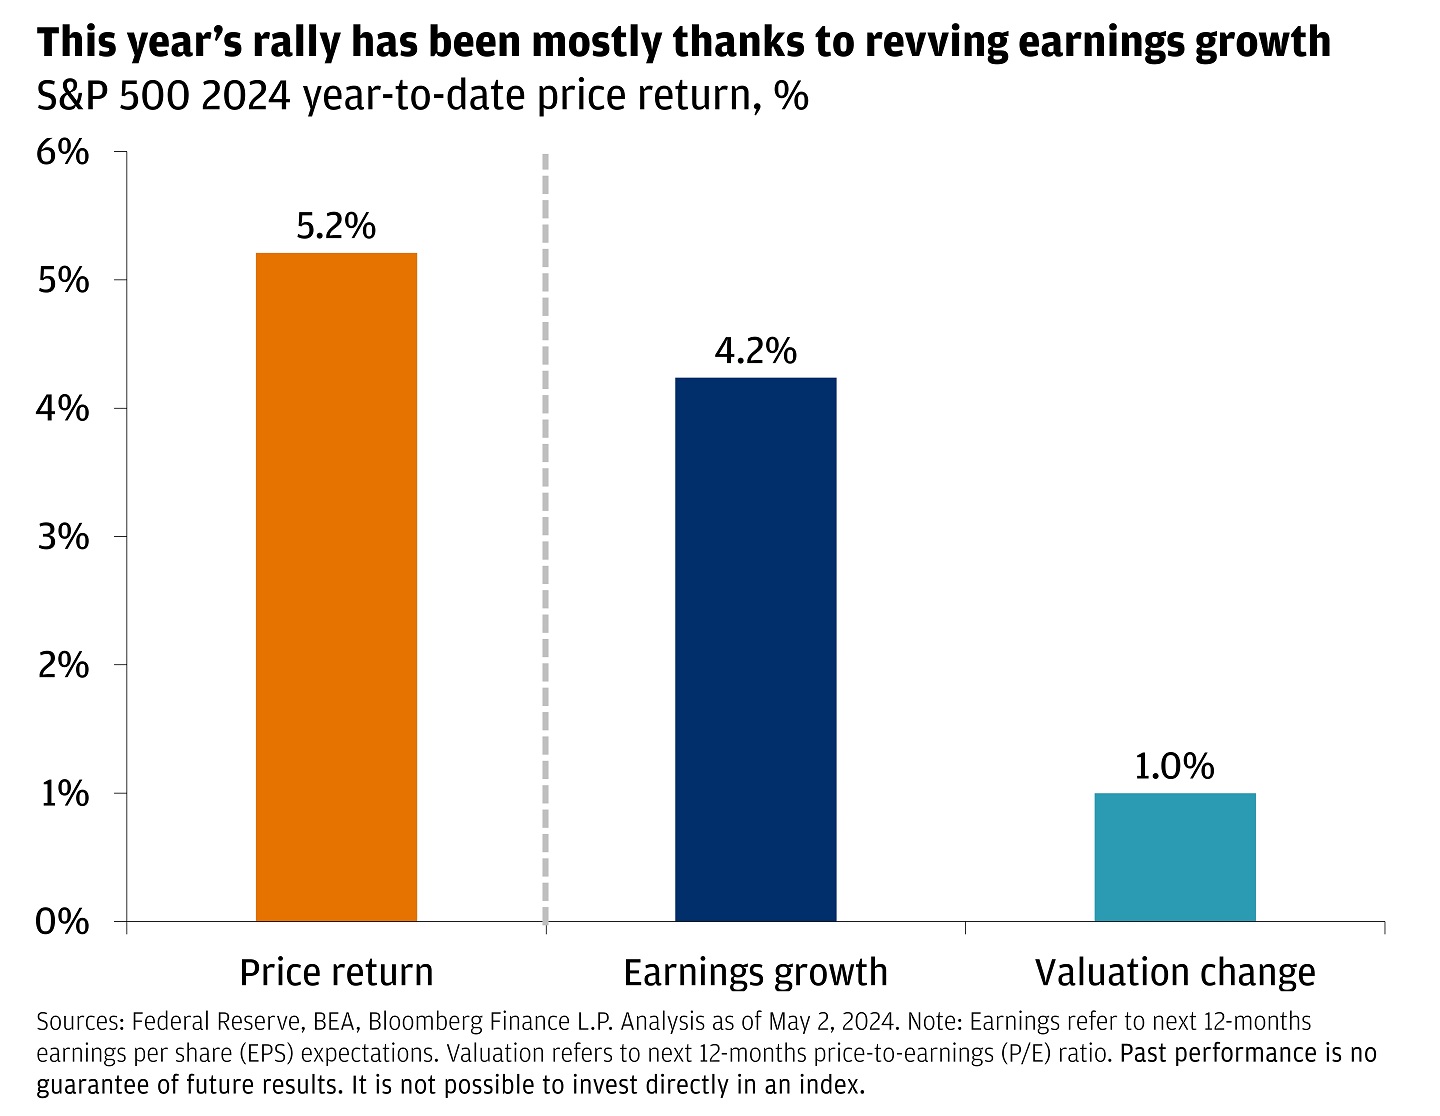 This bar chart shows S&P 500 2024 year-to-date price return, earnings growth, and valuation change. 